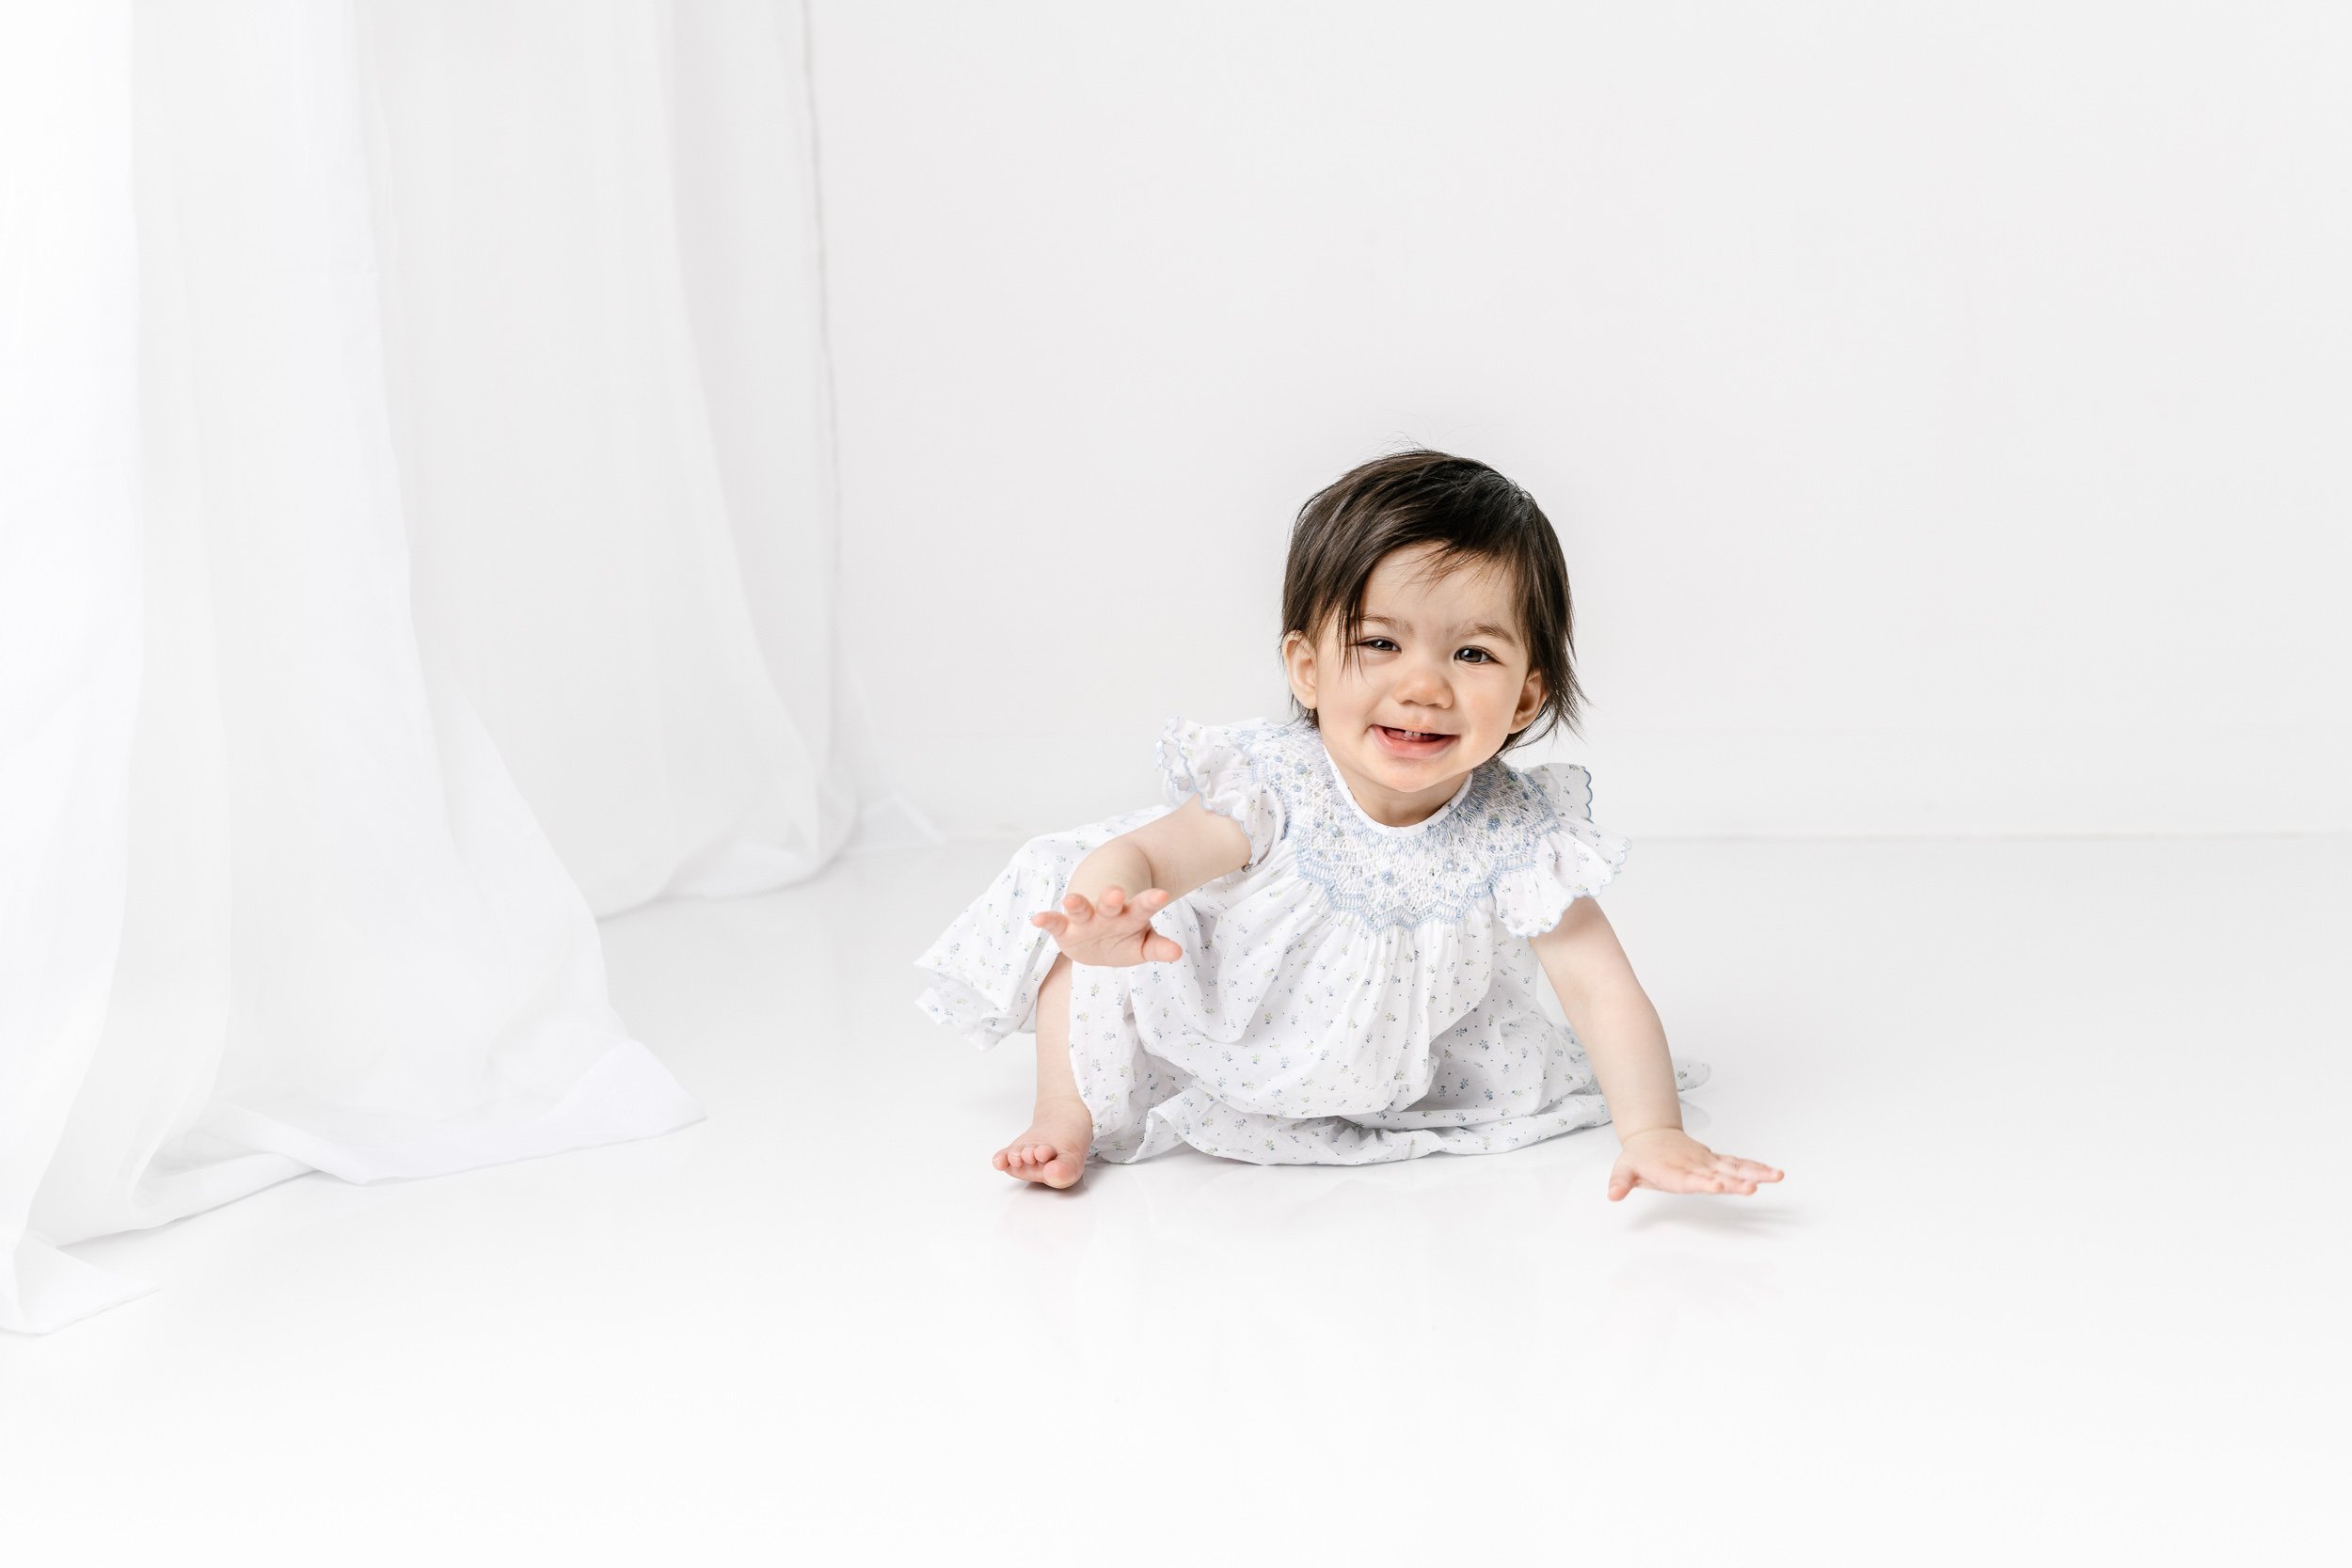  In a studio with lots of natural light, Nicole Hawkins Photography captures birthday portraits. cute baby outfits crawling baby girl #nicolehawkinsphotography #nicolehawkinsbirthday #nicolehawkinsportraits #NJstudiophotography #1stbirthday 